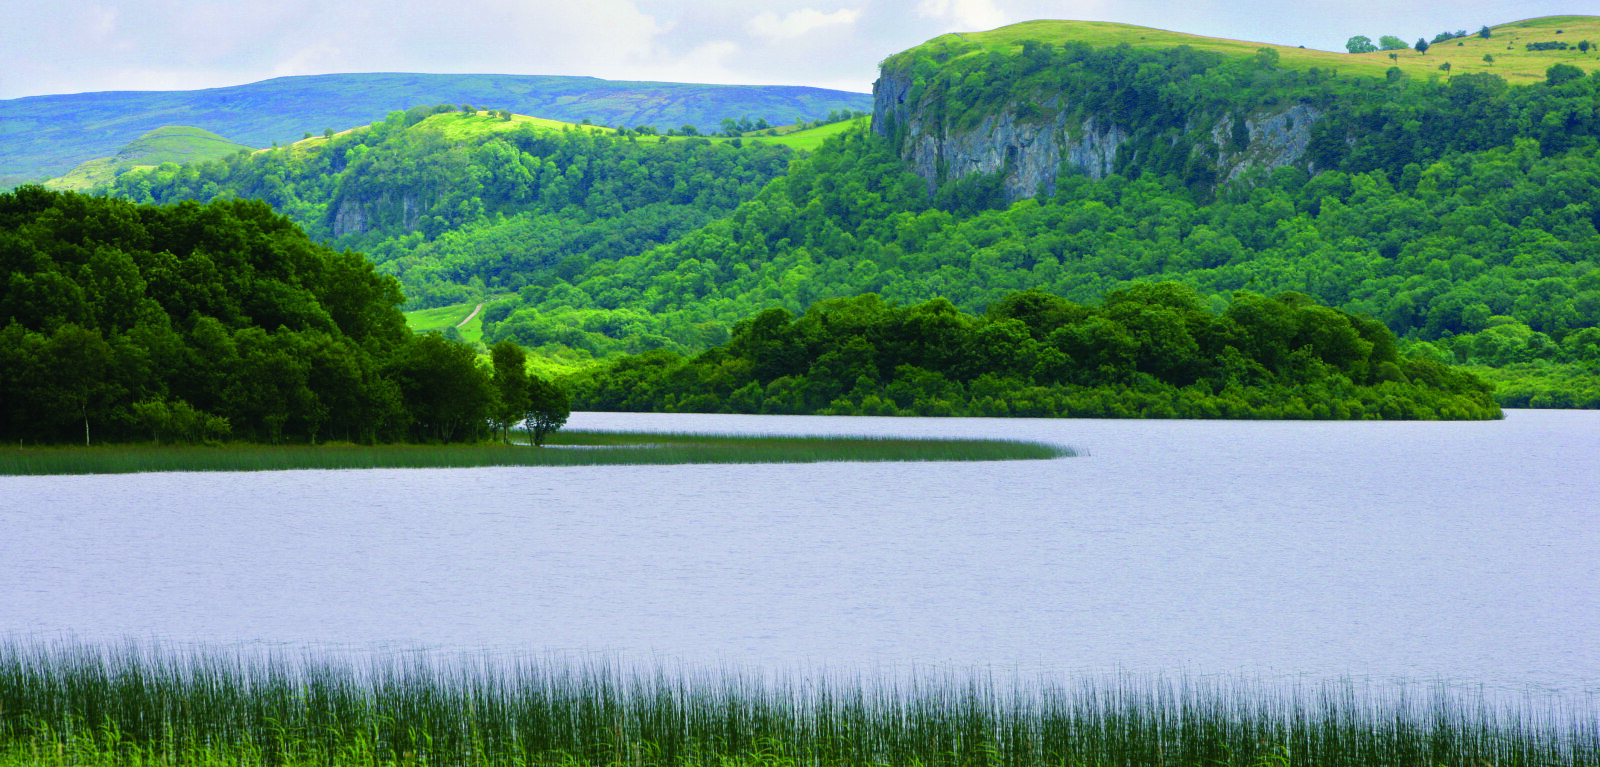 The Hanging Rock, part of Cuilcagh Mountains in County Fermanagh, Northern Ireland.